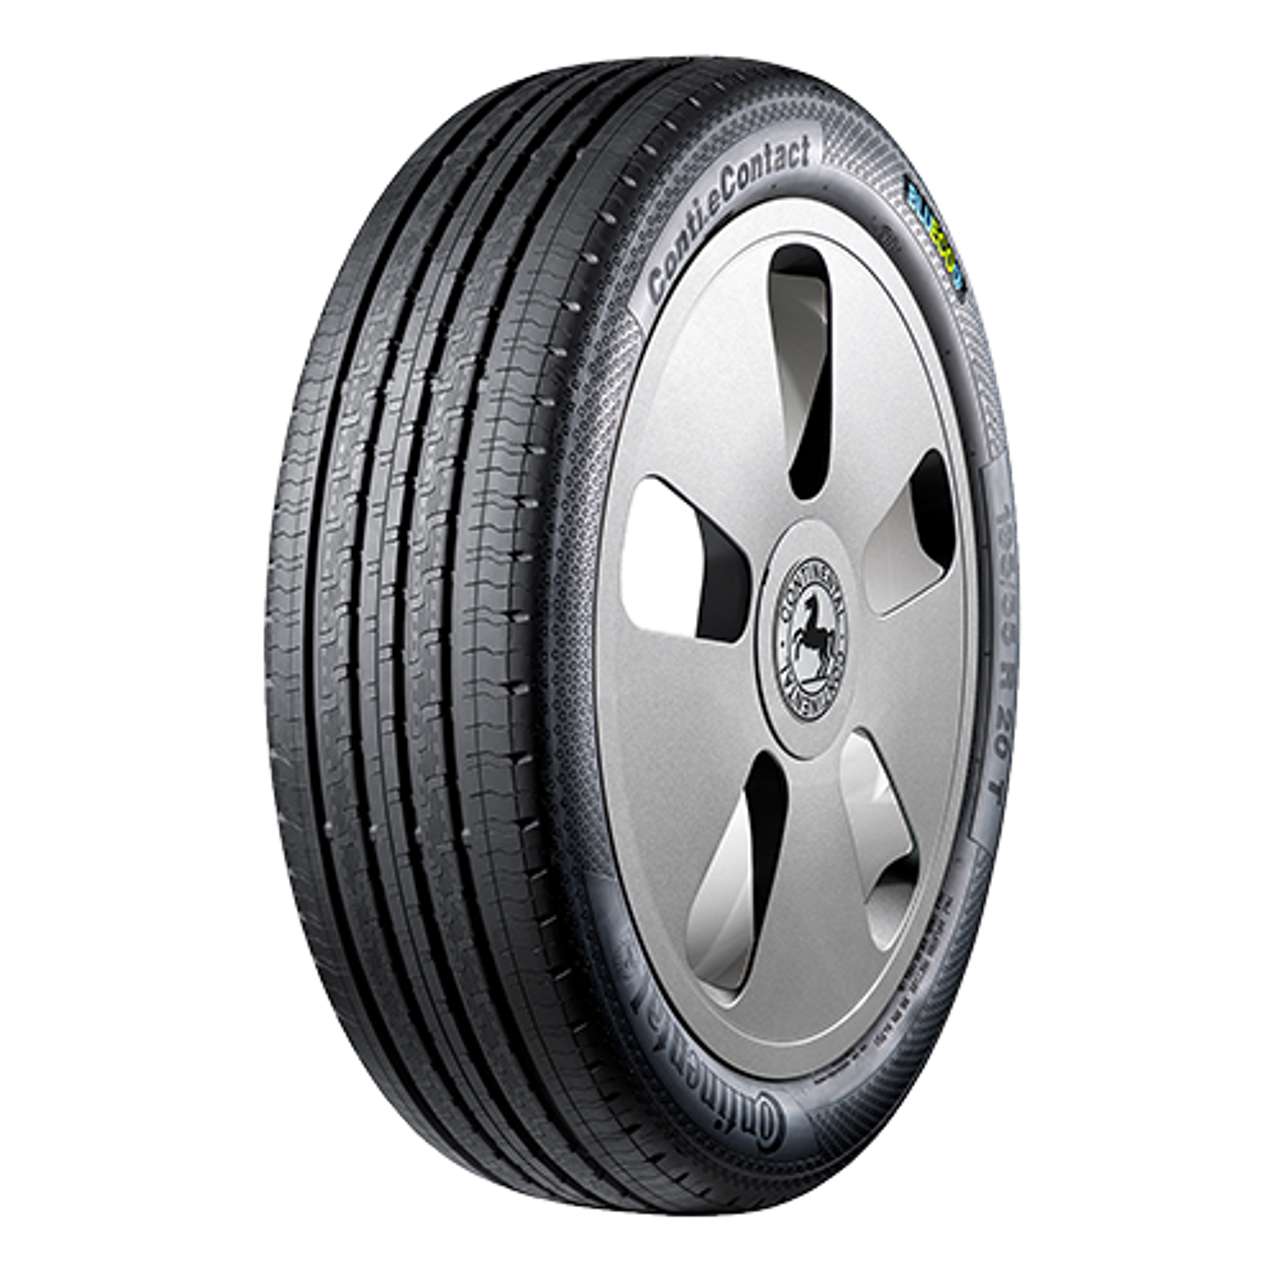 CONTINENTAL CONTI.ECONTACT (EVc) 125/80R13 65M BSW von Continental